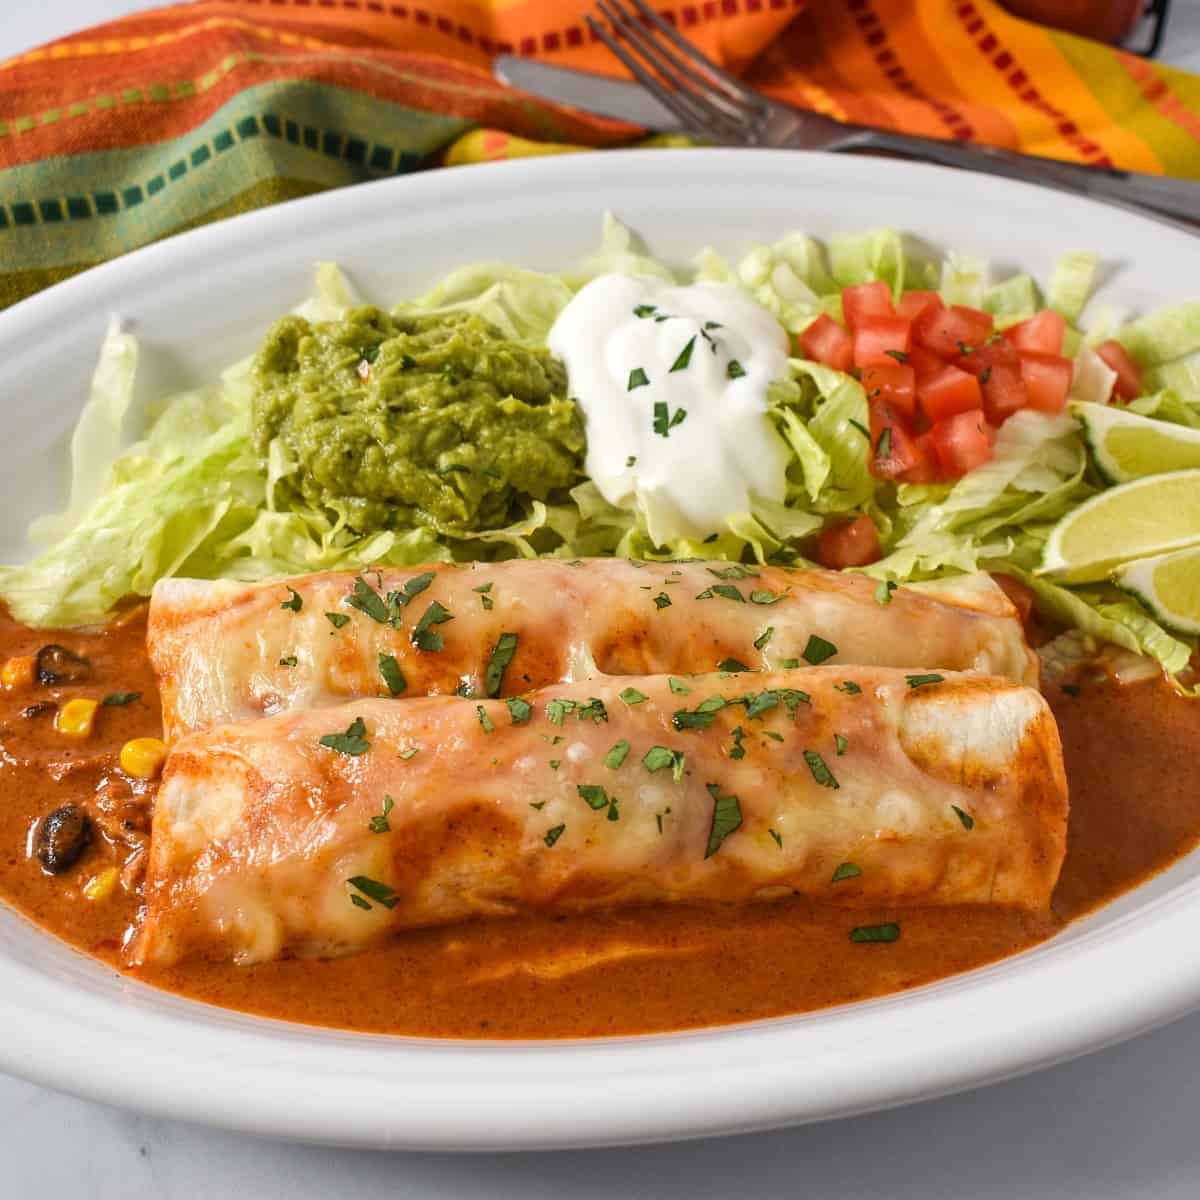 An image of the chicken enchiladas served on a large white plate with lettuce, guacamole, sour cream and tomatoes. In the background there is a linen with red, orange and green lines.